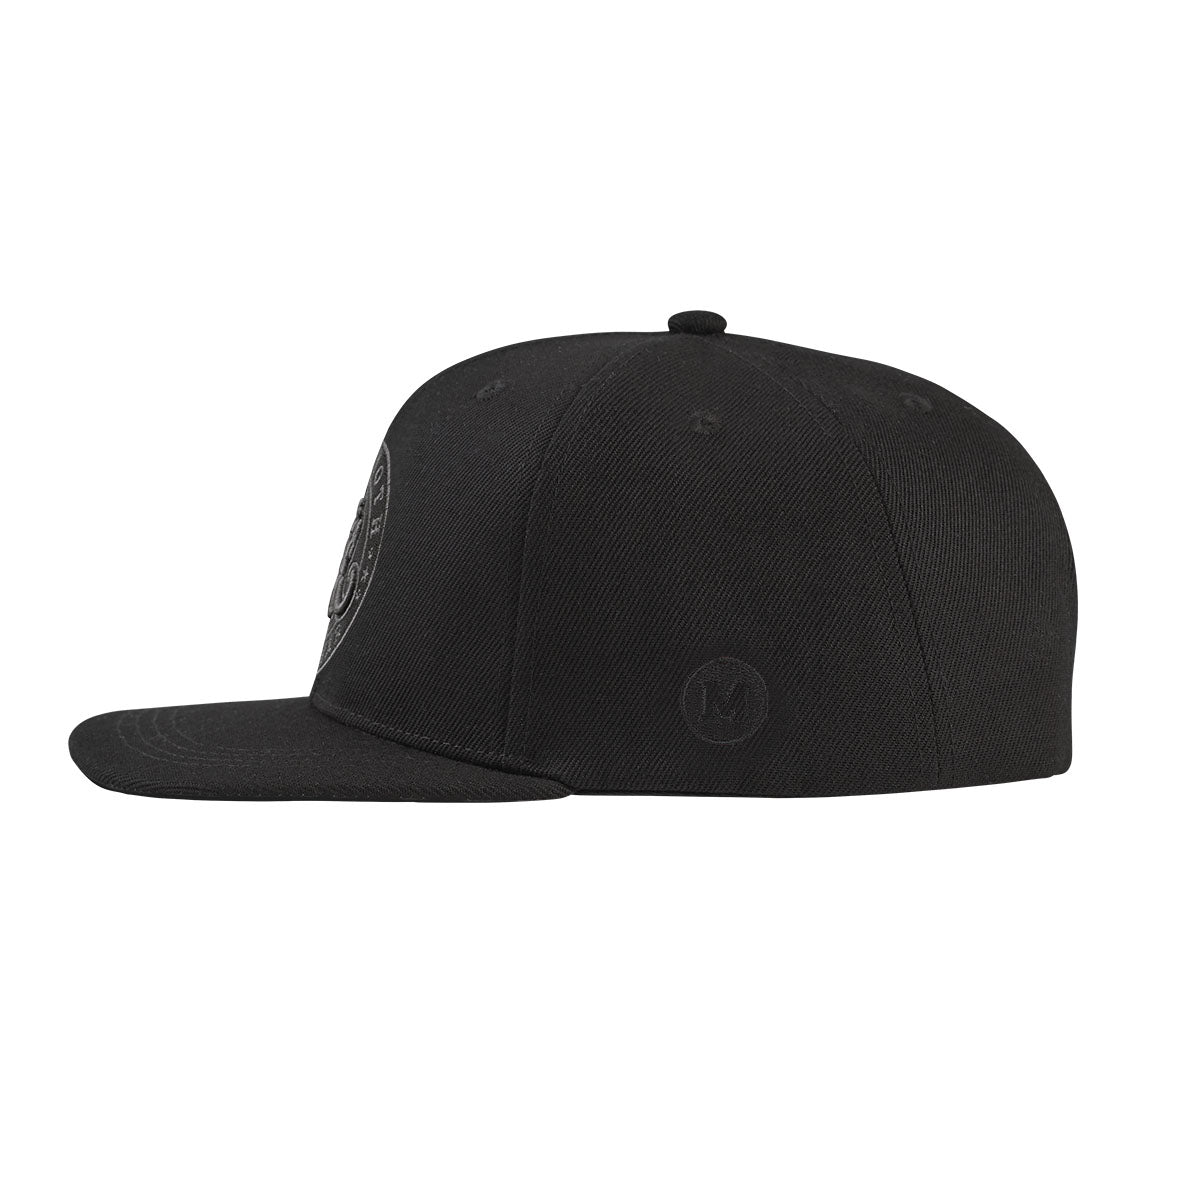 Classic Blacked Out Snapback Hat - Order Now